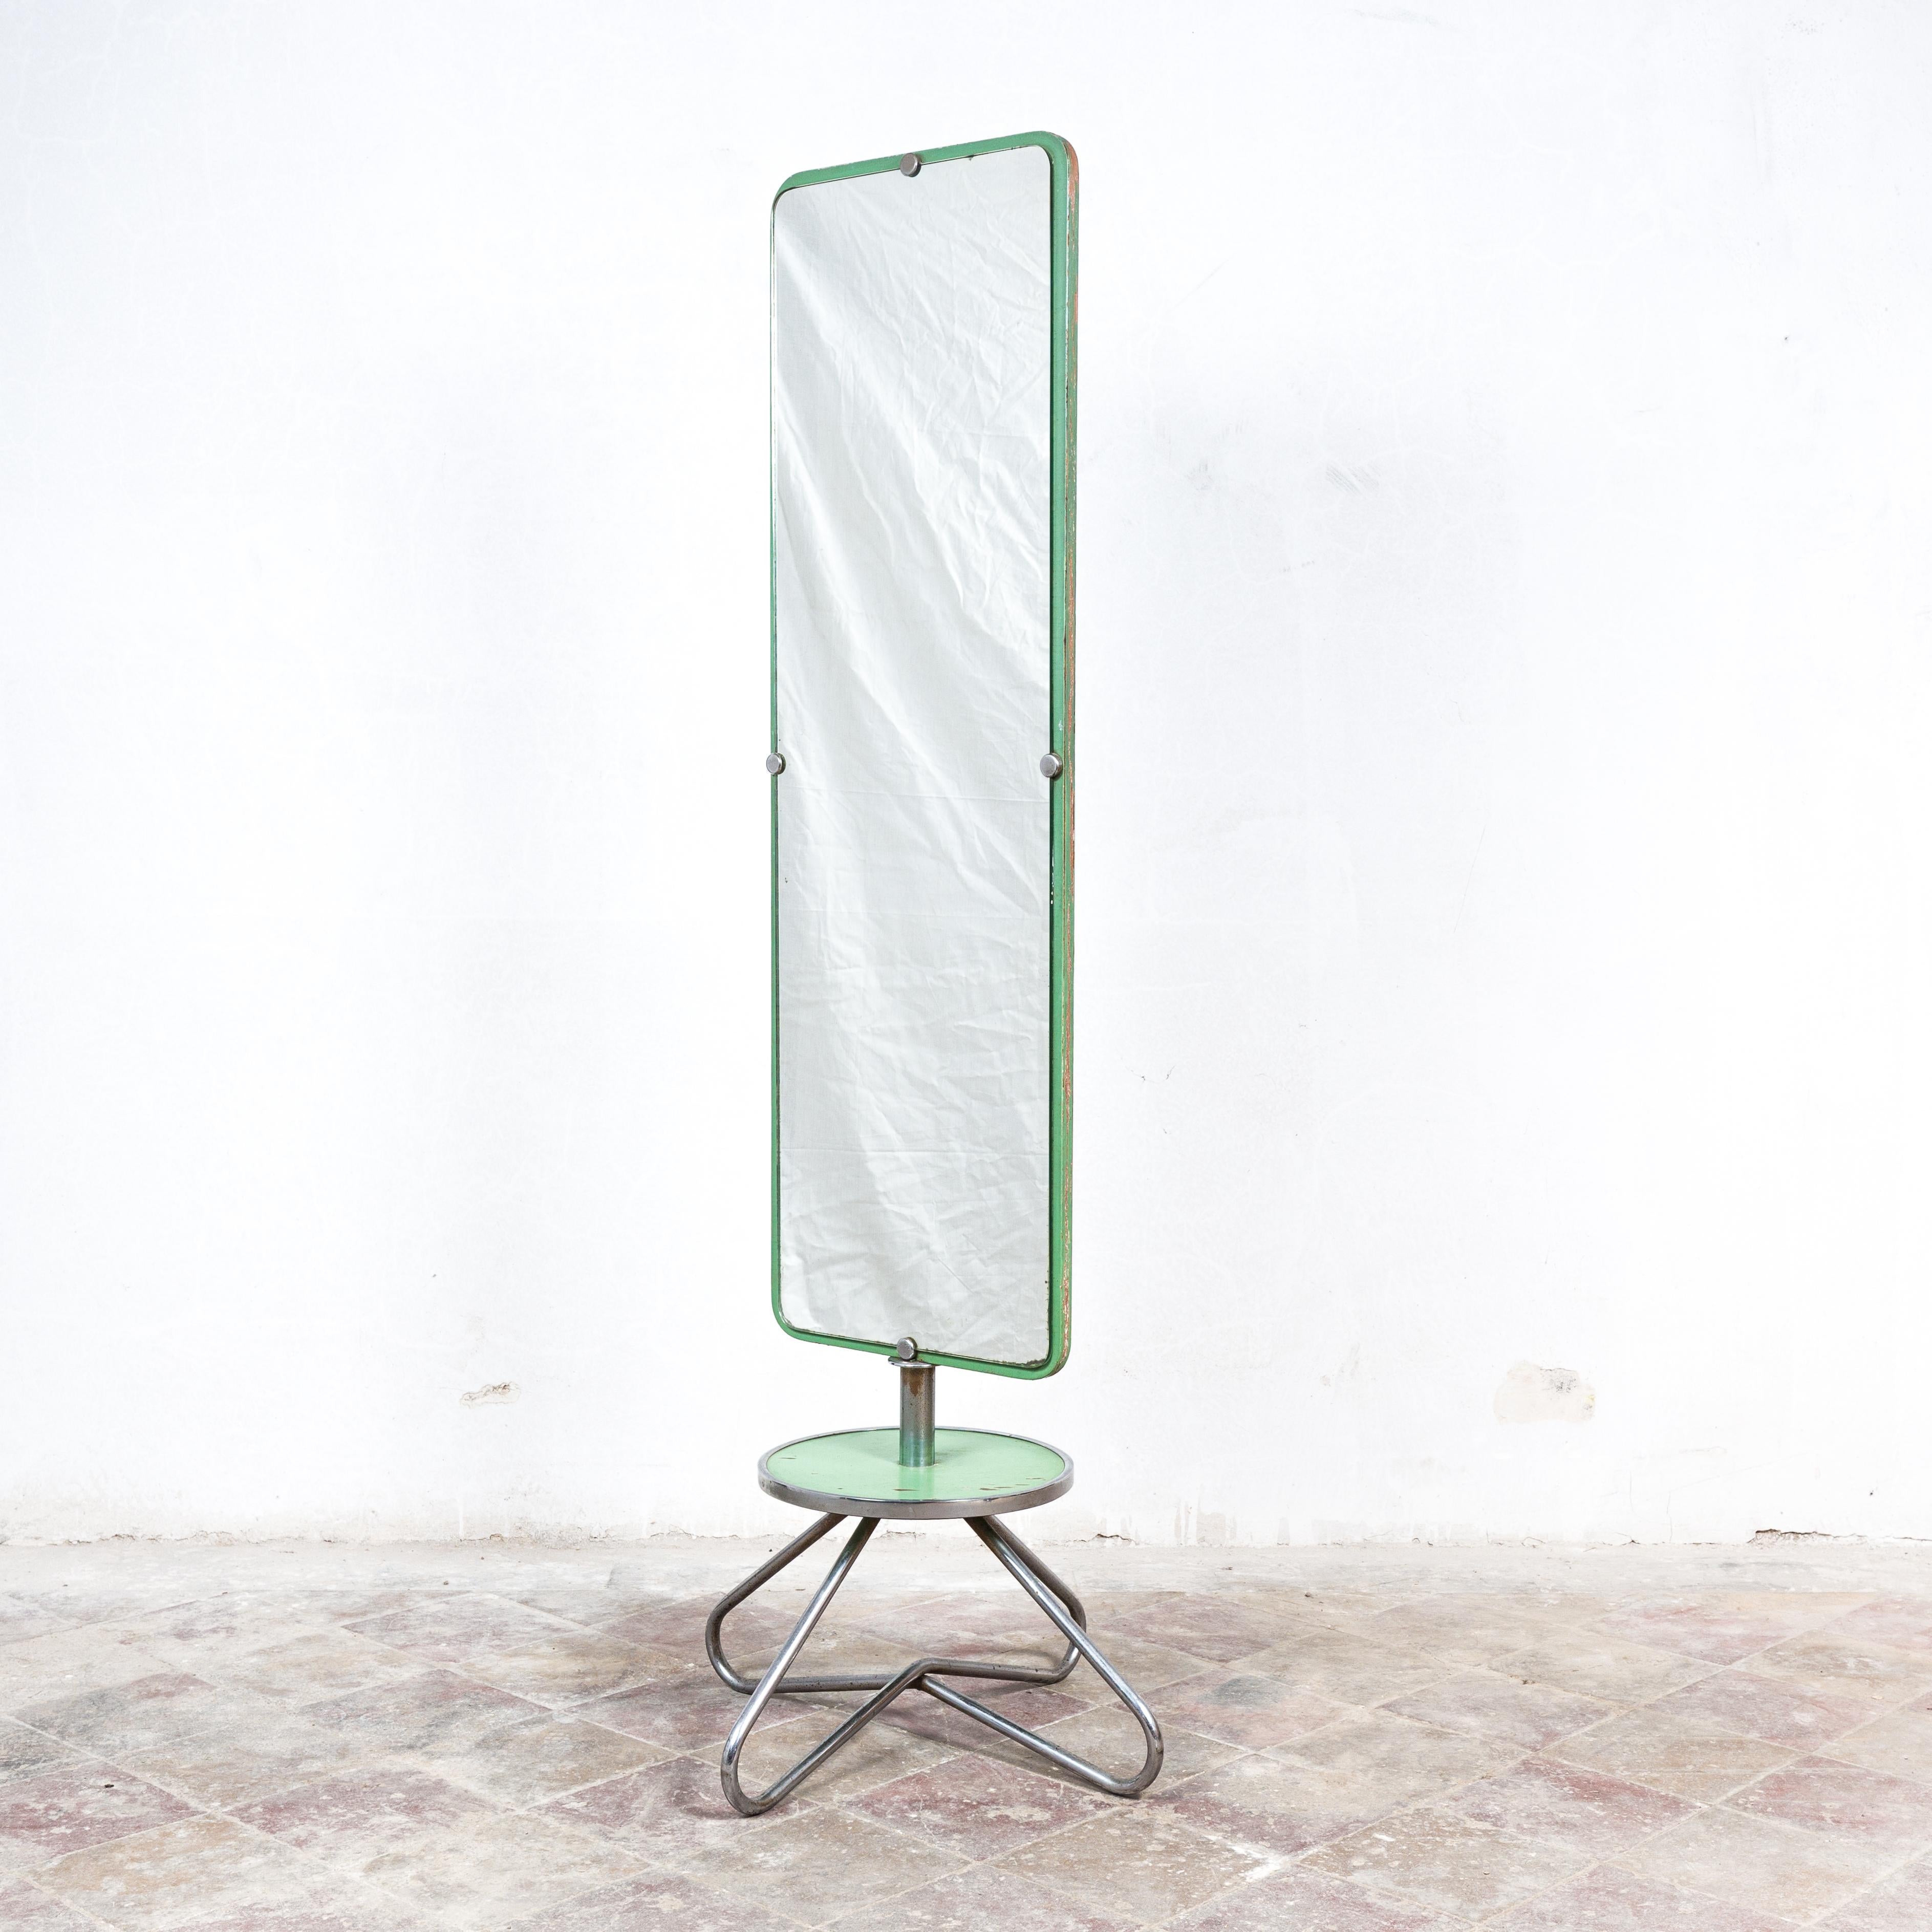 Unique and extremely rare functionalist mirror, catalogue no. 1266. Manufactured by Vichr and Co. Prague, former Czechoslovakia in 1930's. Chrome plated tubular steel, cut mirror, plywood. Height 175 cm, mirror 40 x 130 cm. In good original